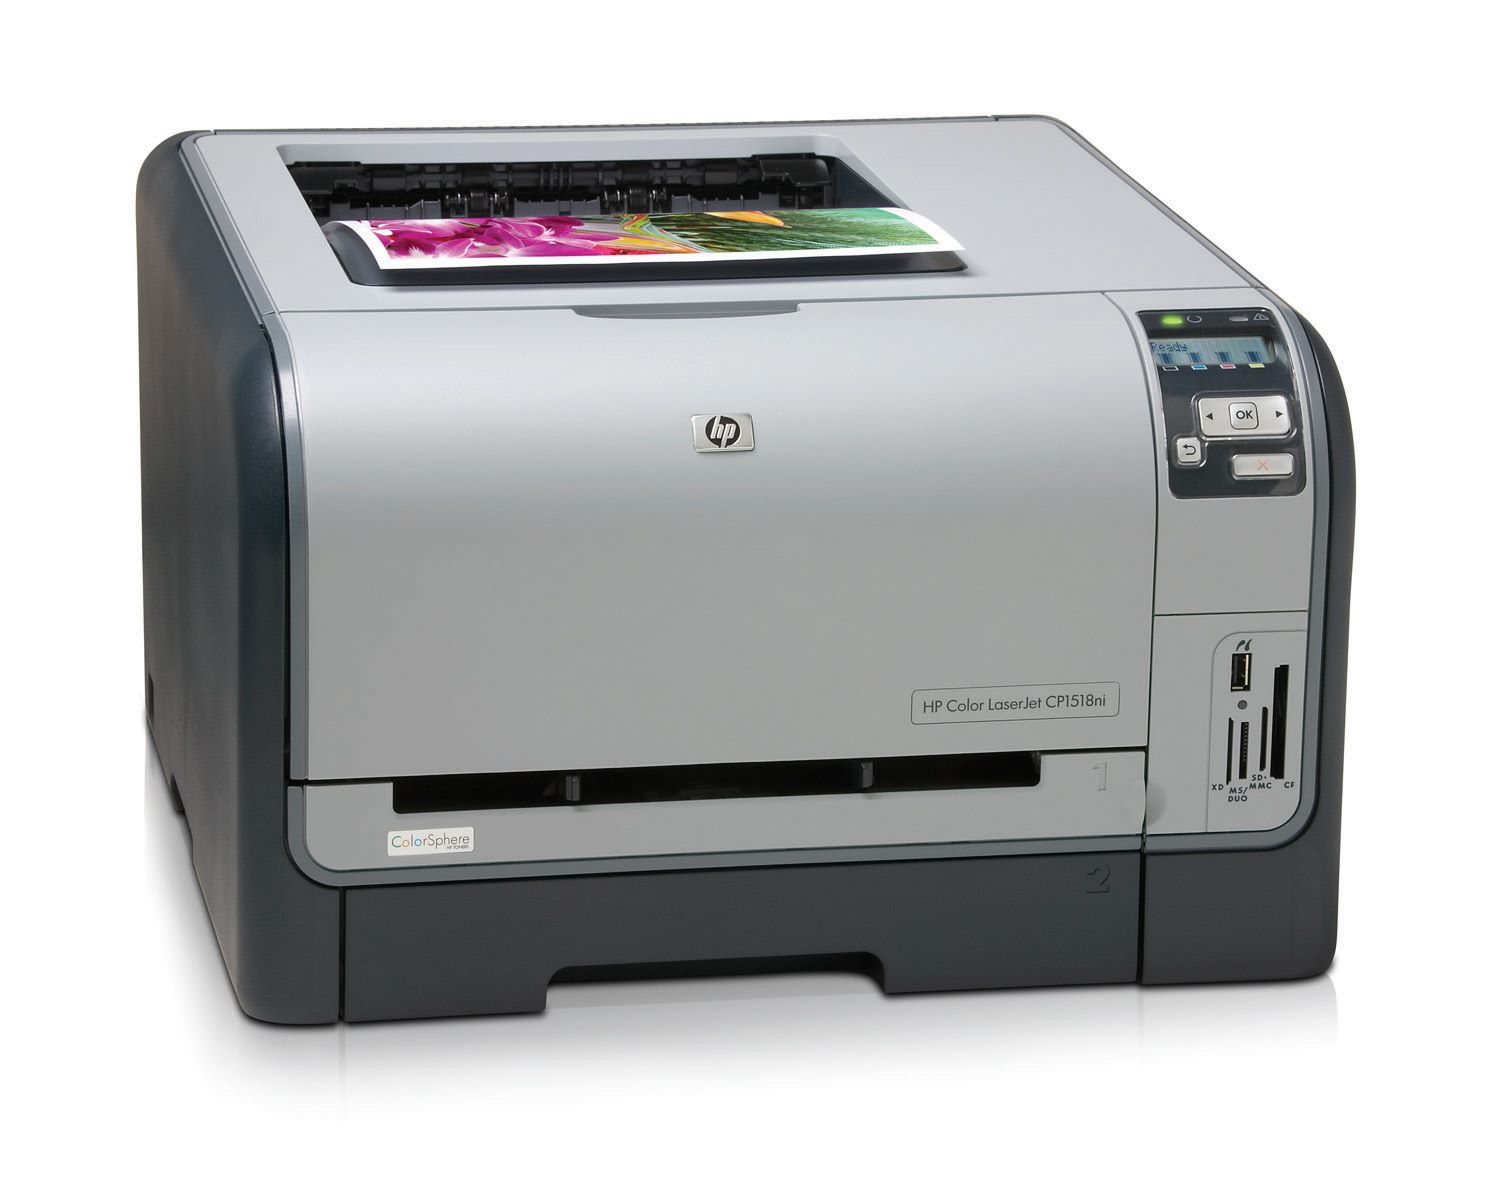 How To Print From A HP Printer